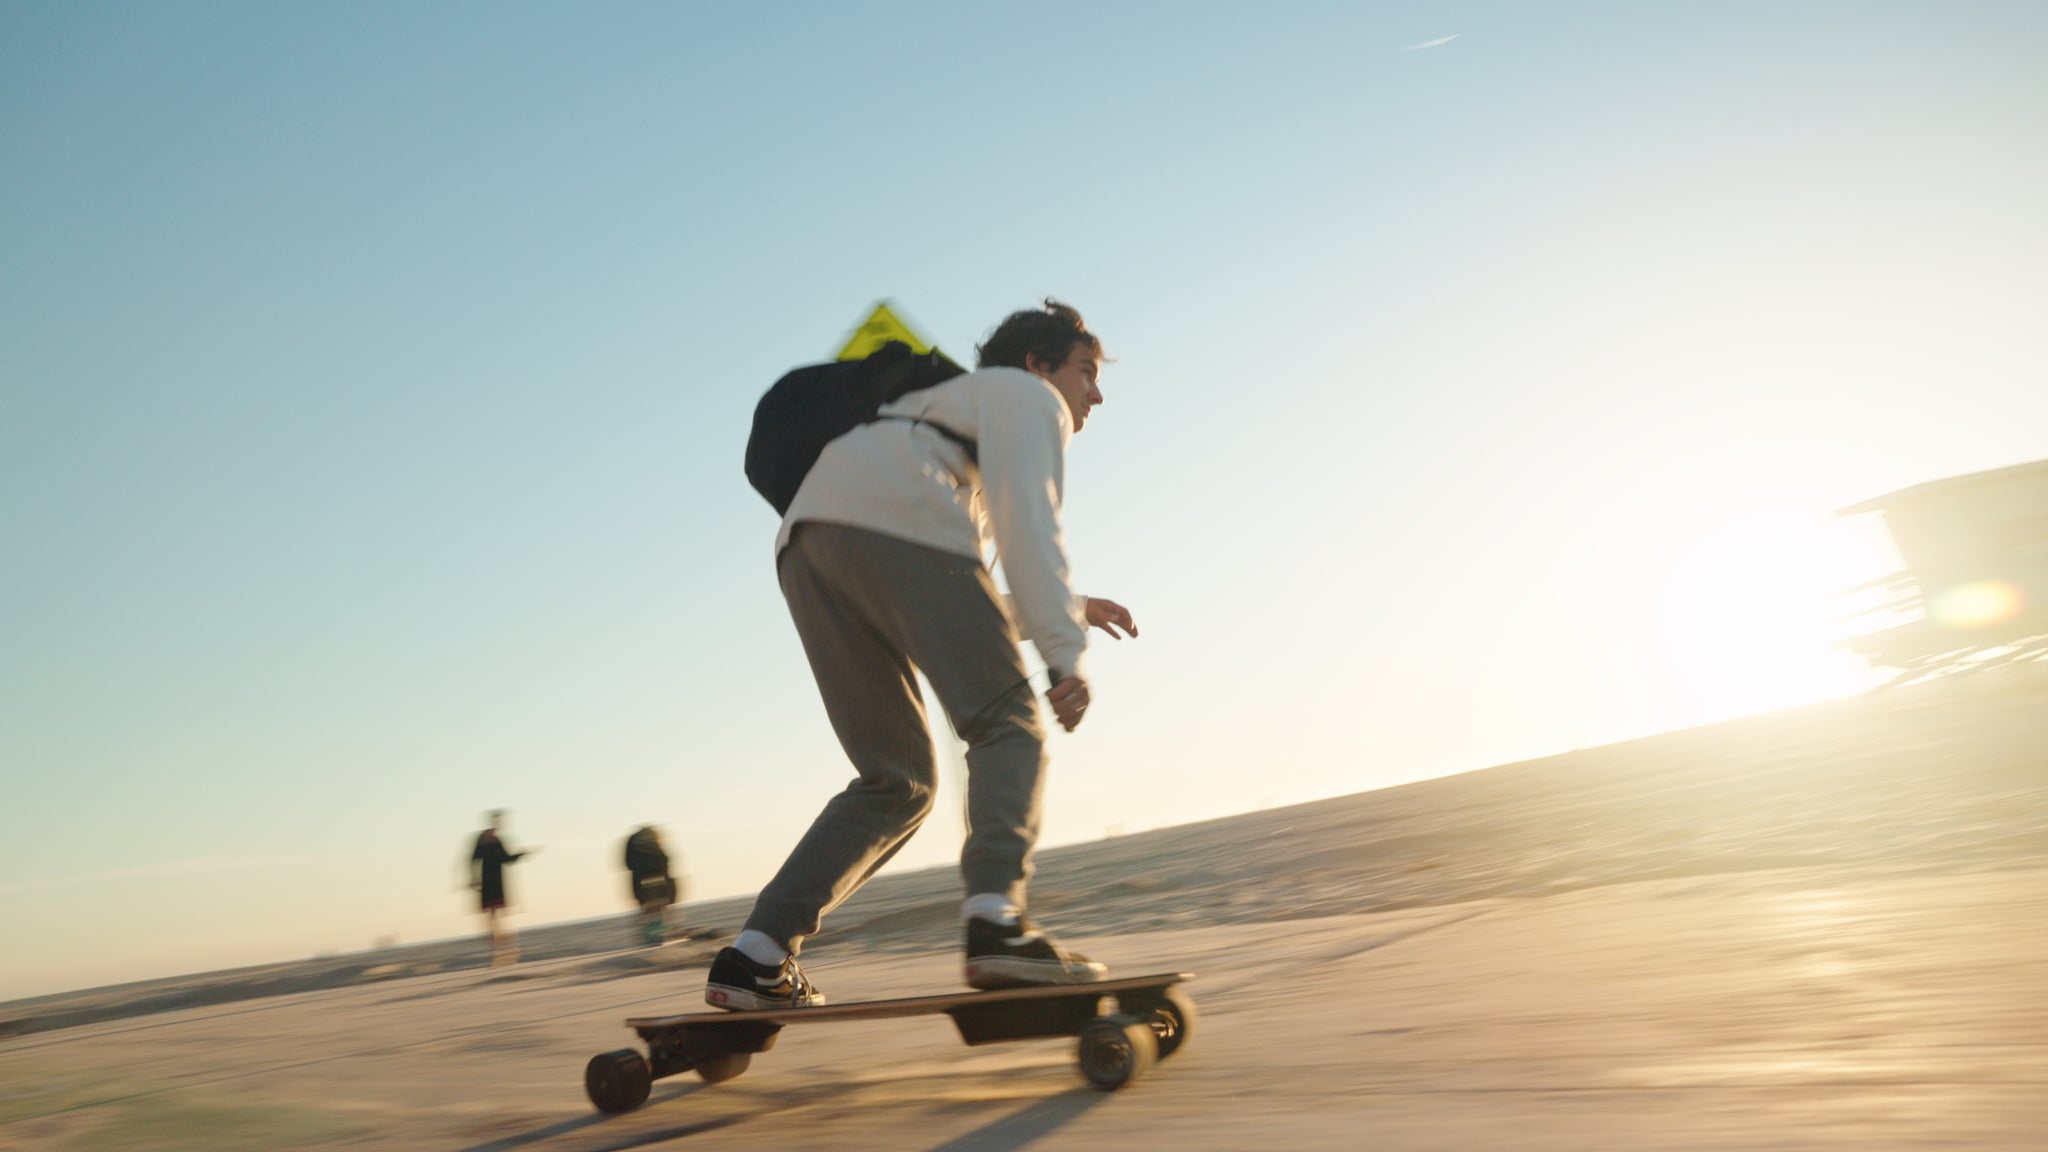 Top 10 Surprising Ways Electric Skateboard Can Change Your Life